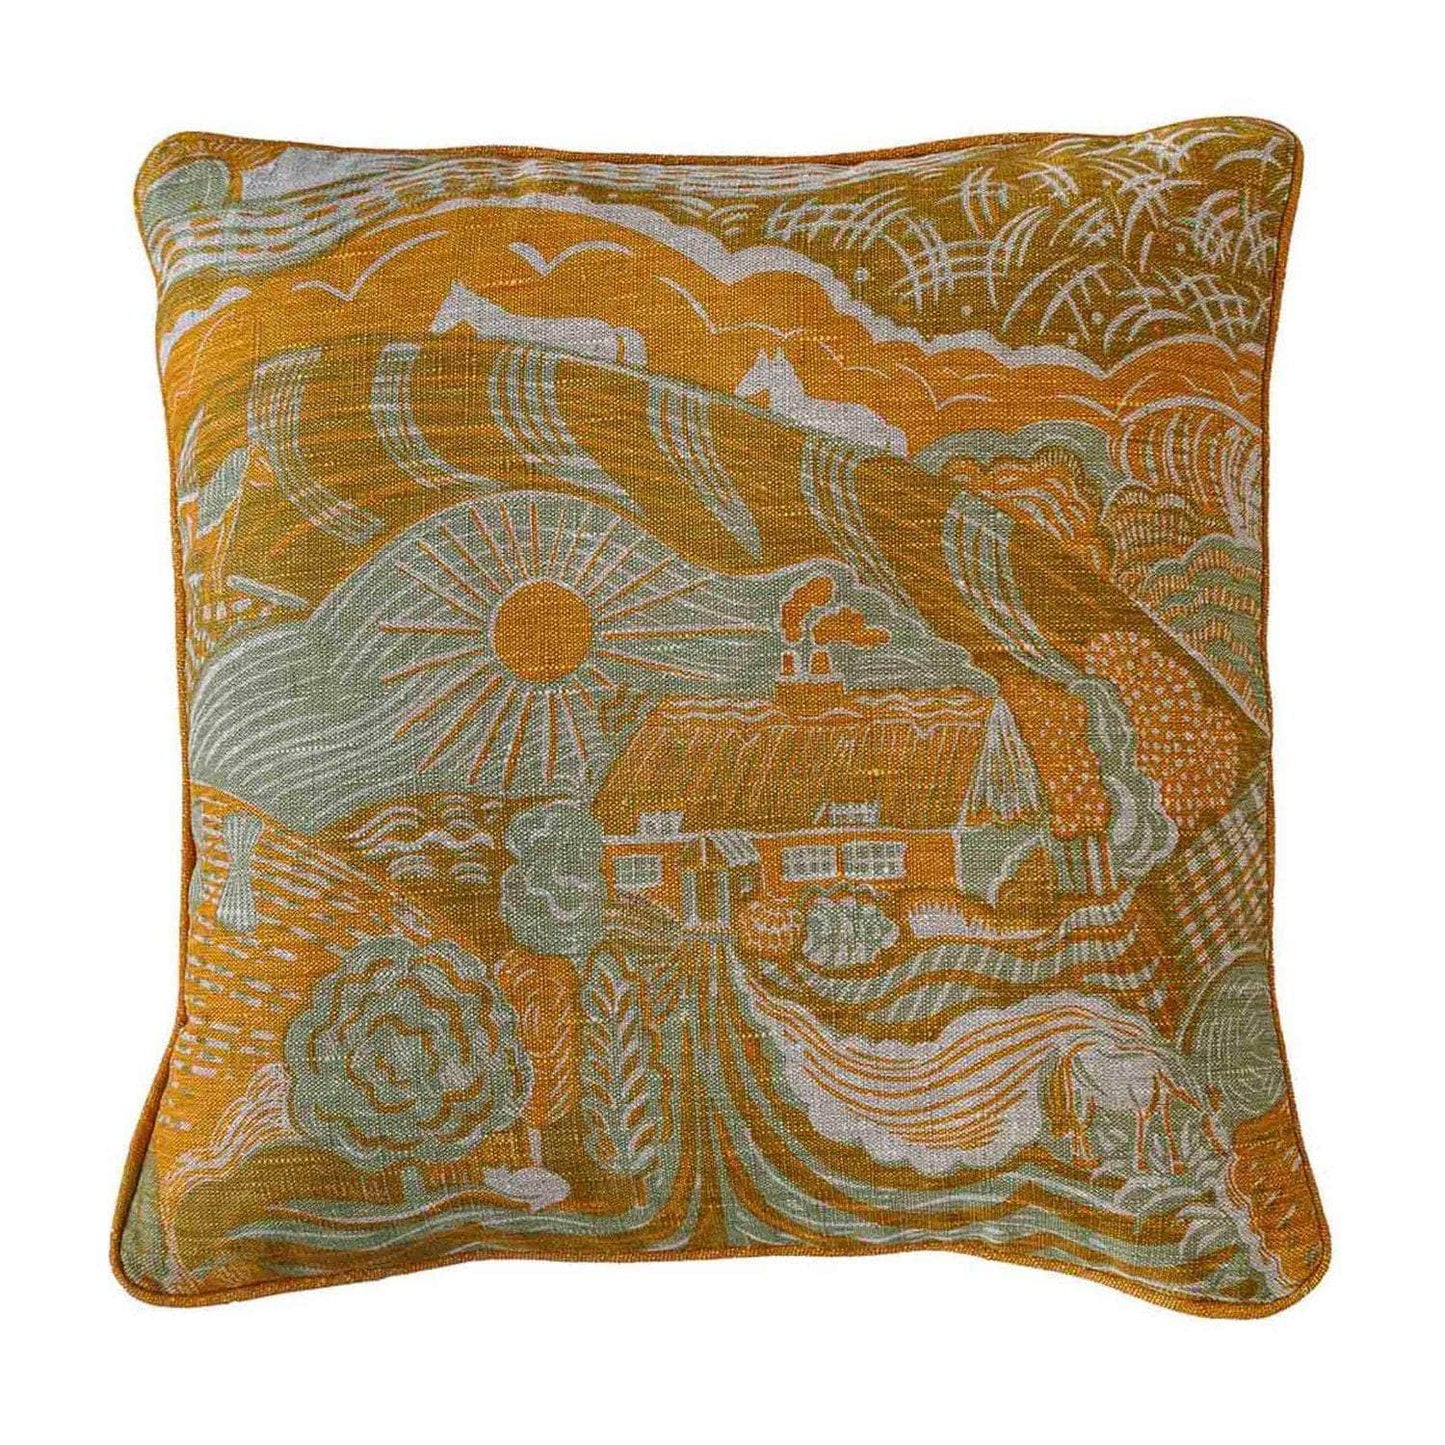 The Plough Small Piped Cushion in Harvest Gold and Corn Grey